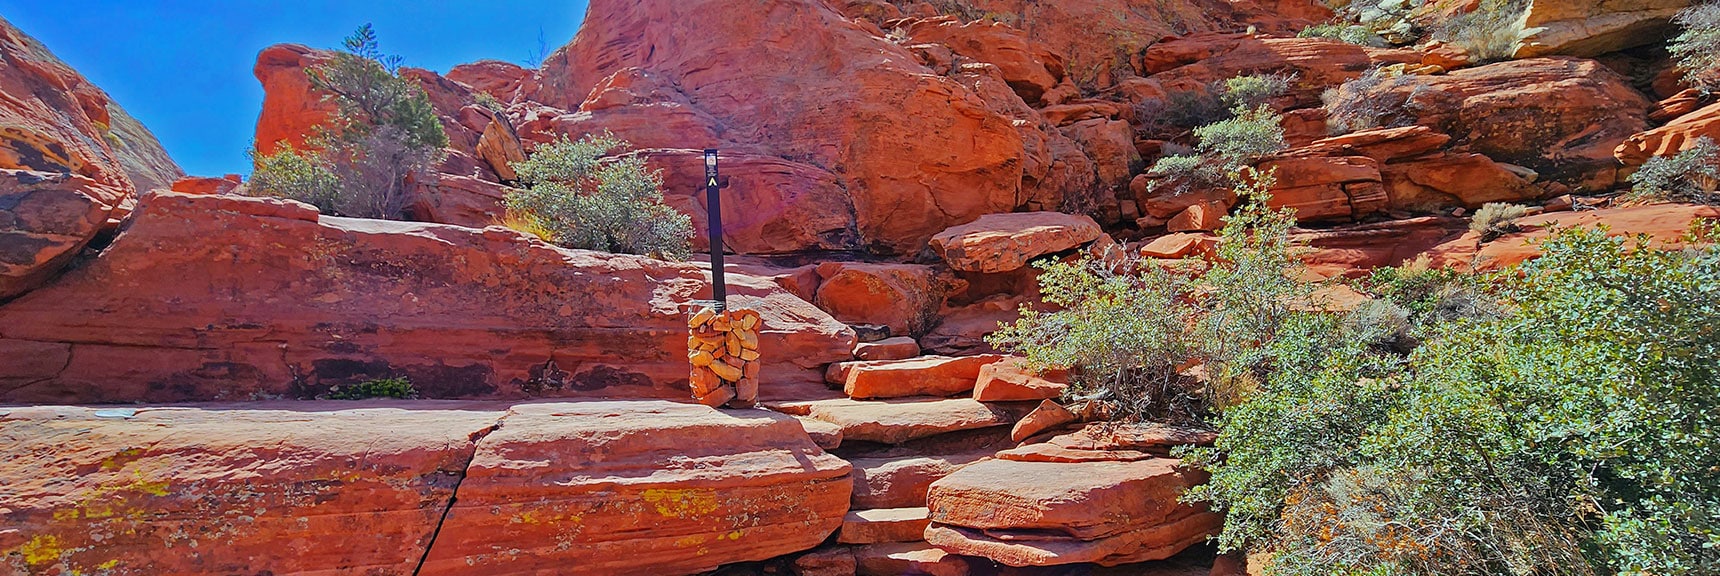 Artfully Placed Sandstone Stairways Aid the More Steep Ascents. a| Ash Canyon to Calico Tanks | Calico Basin and Red Rock Canyon, Nevada | David Smith | Las Vegas Area Trails